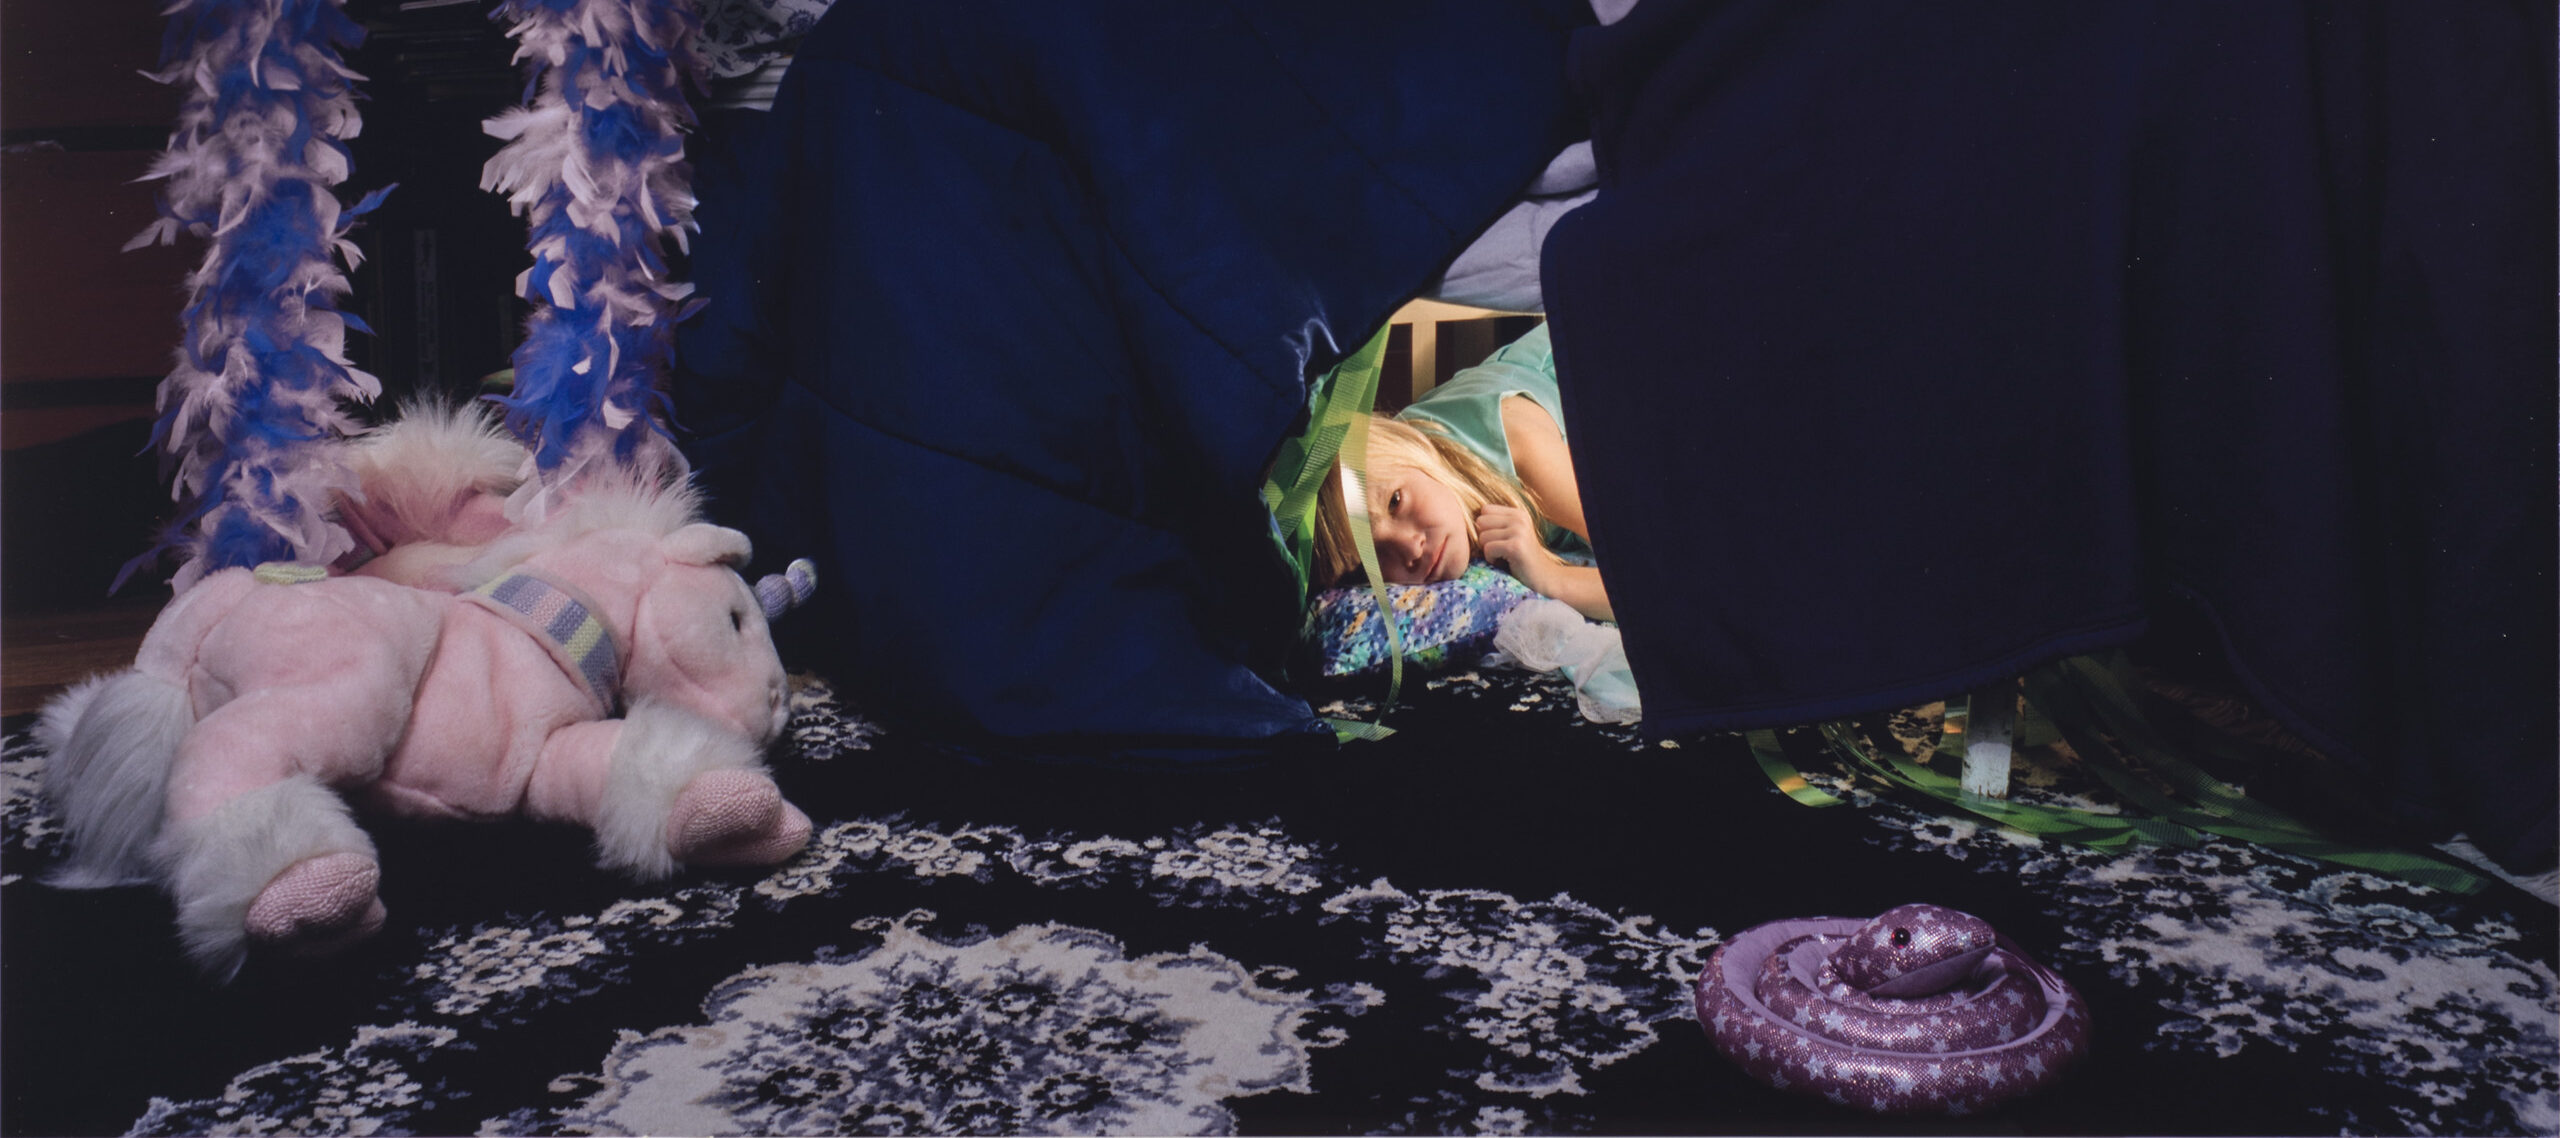 A color photograph of a young light skinned girl with light blonde hair. The girl peeks out from a fort made from a dark blue and purple comforter. A light pink and purple stuffed unicorn sits on a purple and white floral rug in front of the fort. A purple, blue, white, and black paper butterfly-shaped kite hangs on the wall above the fort.